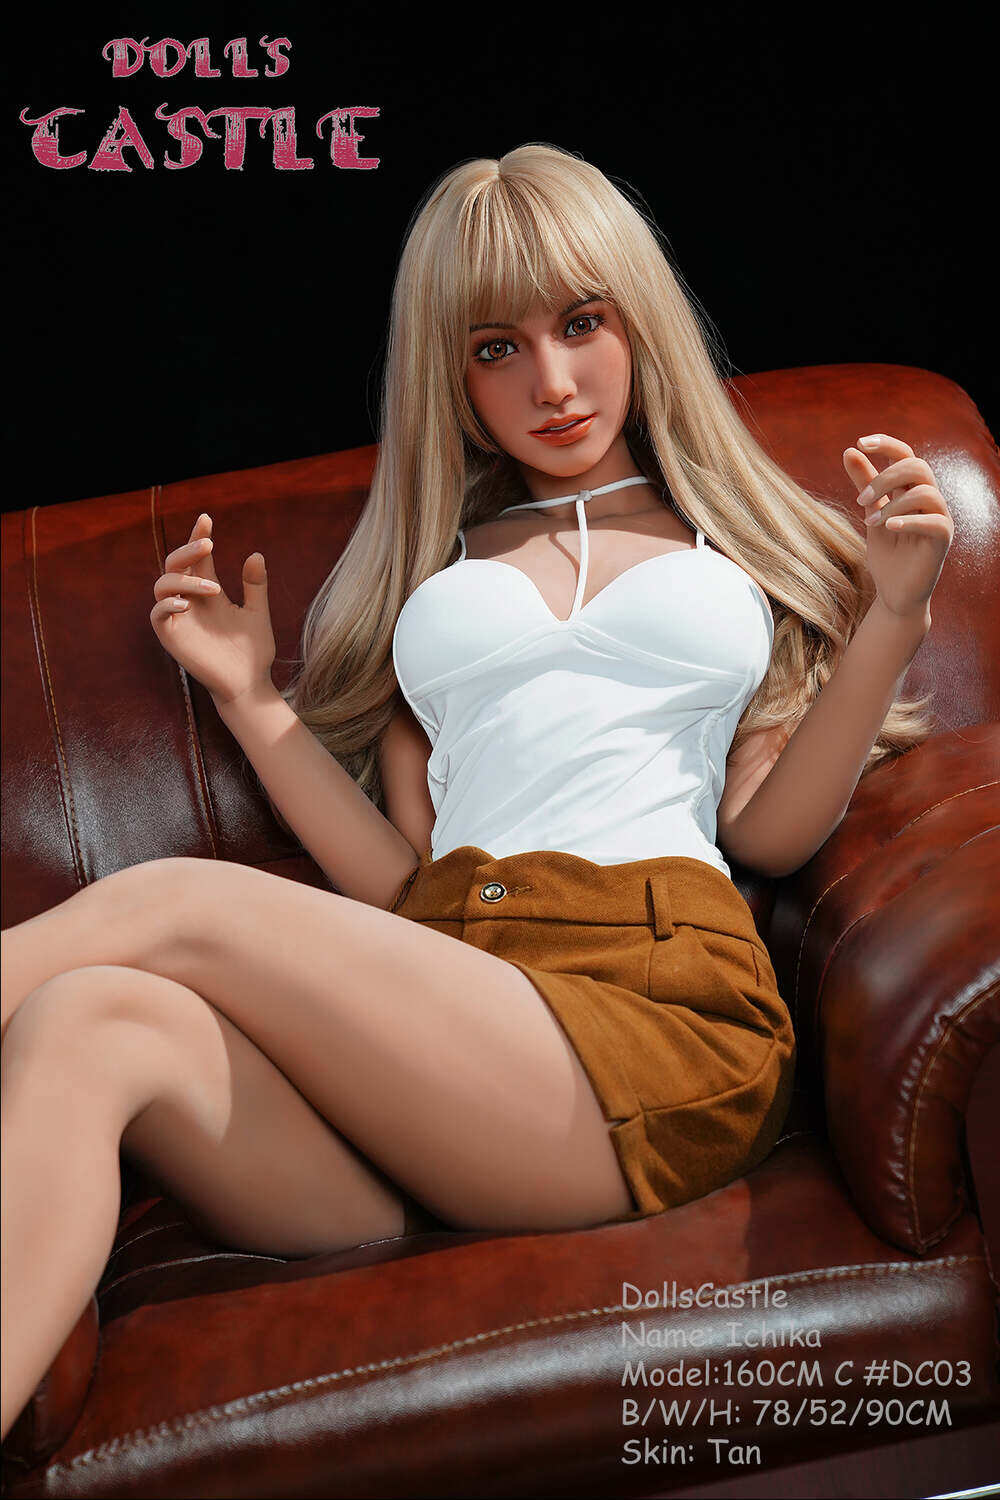 Alaura - E-Cup Pretty Dolls Castle 163cm(5ft4) Love Dolls Real Sex Doll Demonstration (US In Stock) image8